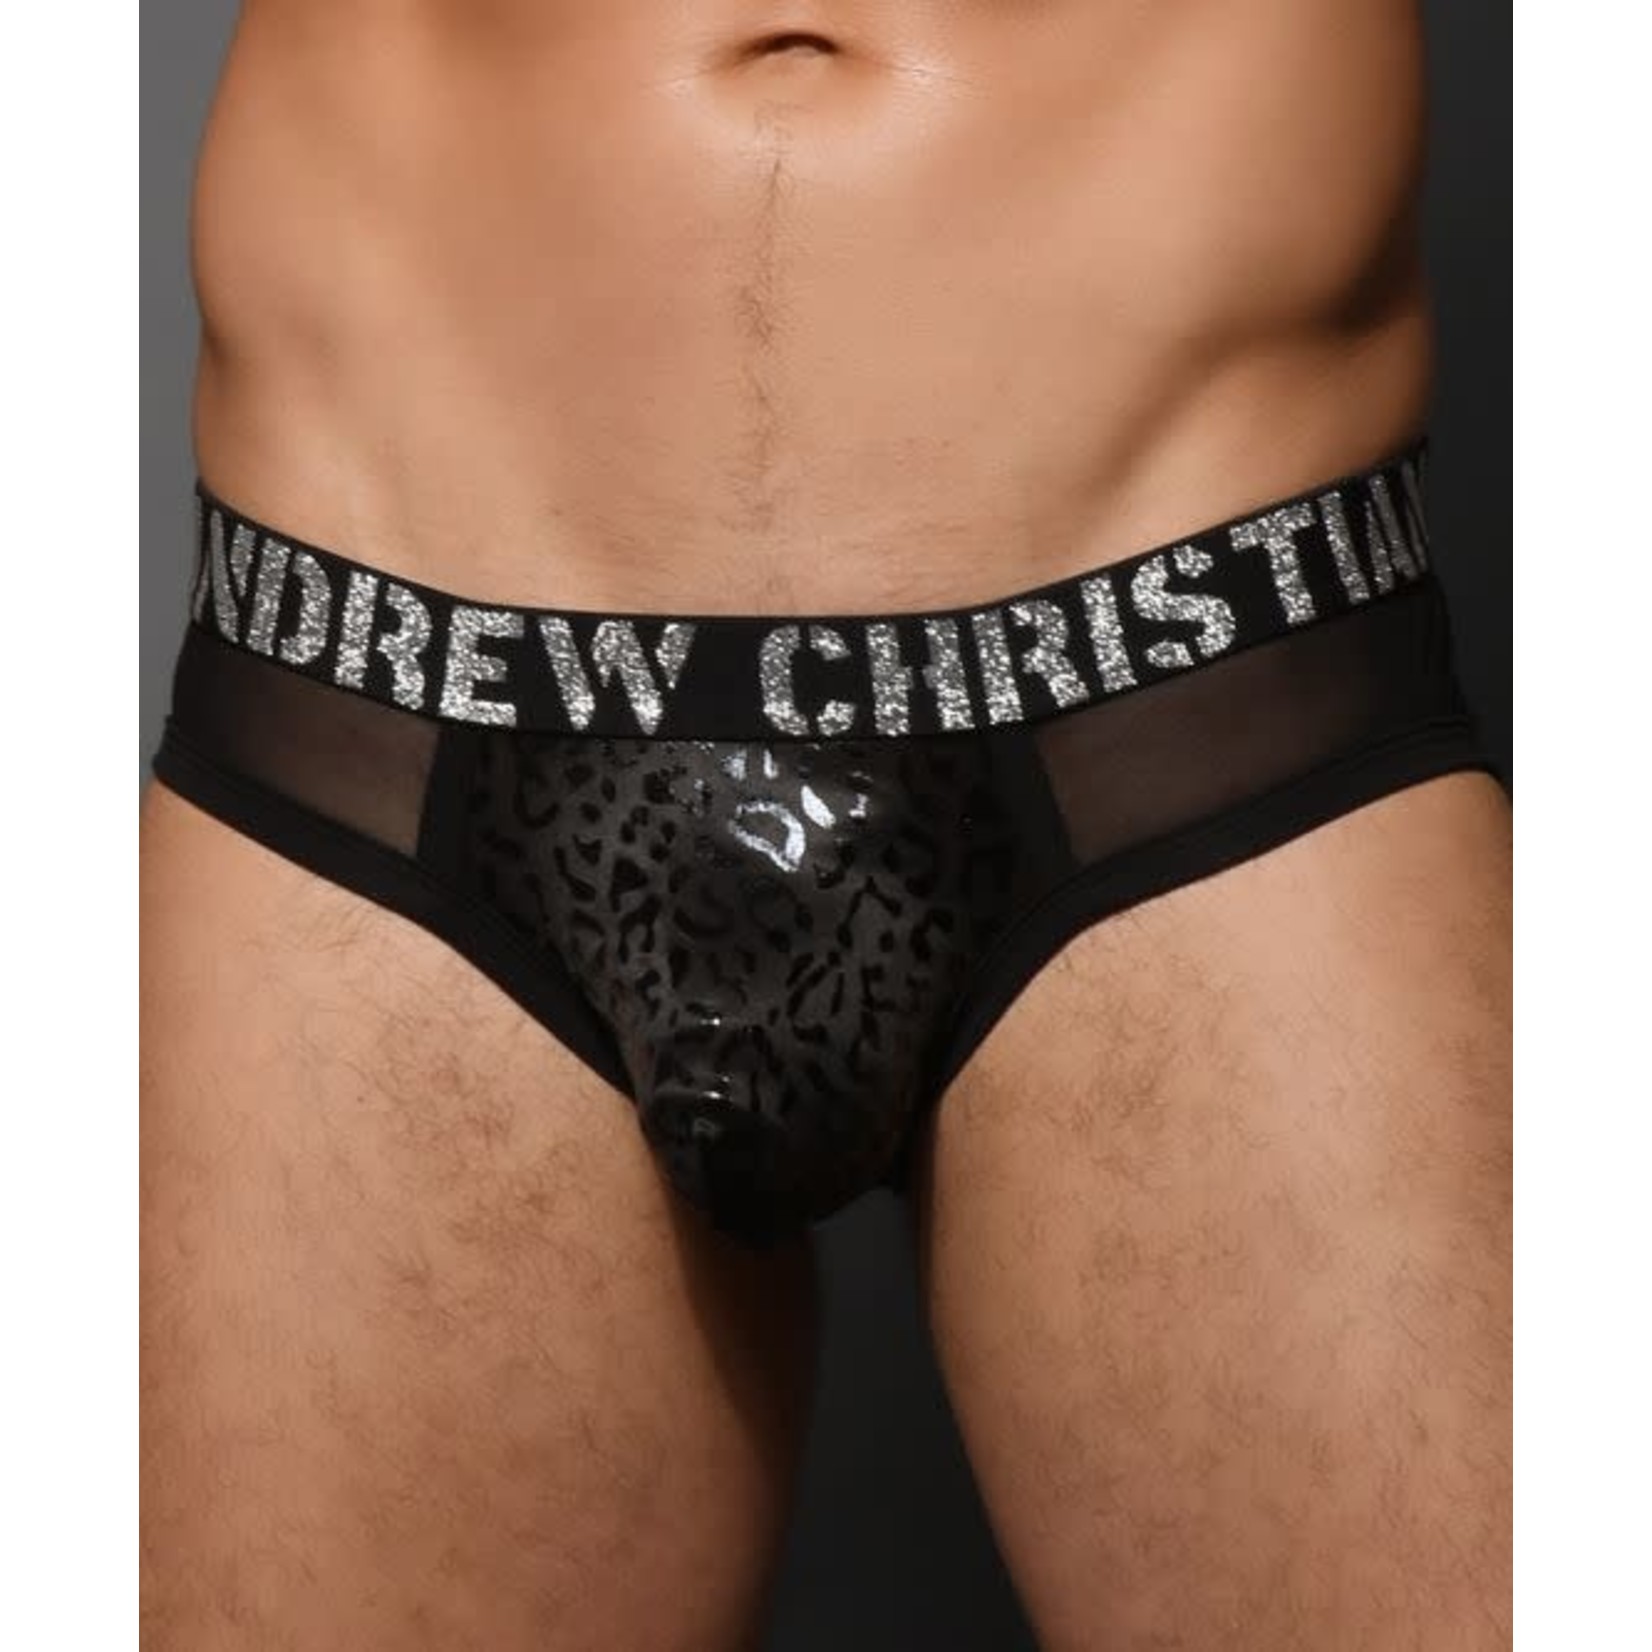 ANDREW CHRISTIAN ANDREW CHRISTIAN - SLICK LEOPARD MESH BRIEF W/ ALMOST NAKED SMALL